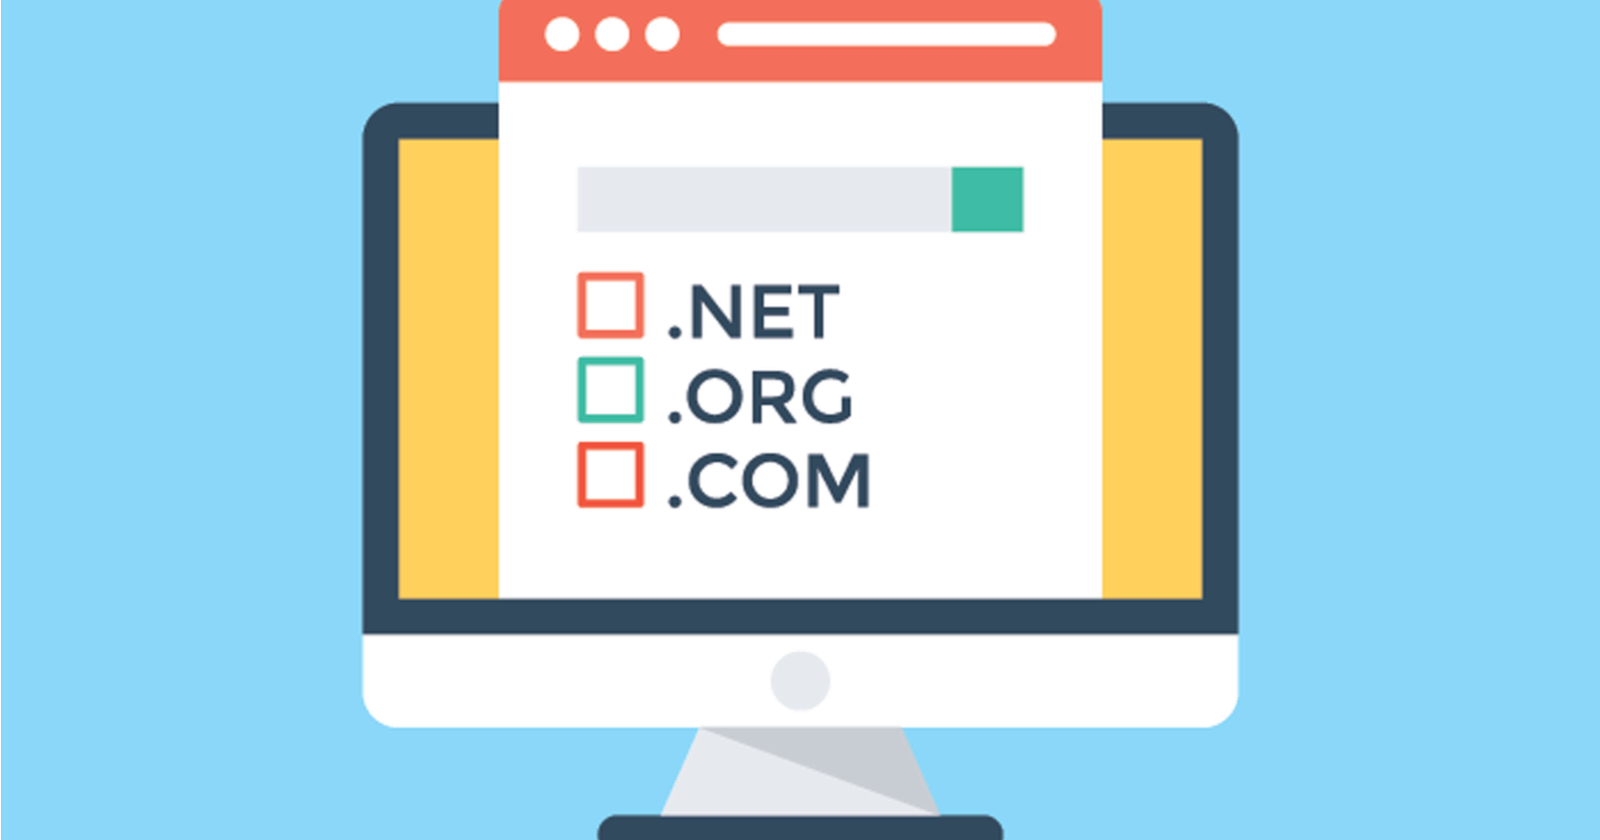 Step-by-Step Guide: How to Set Up a Domain Name with GoDaddy and Namecheap